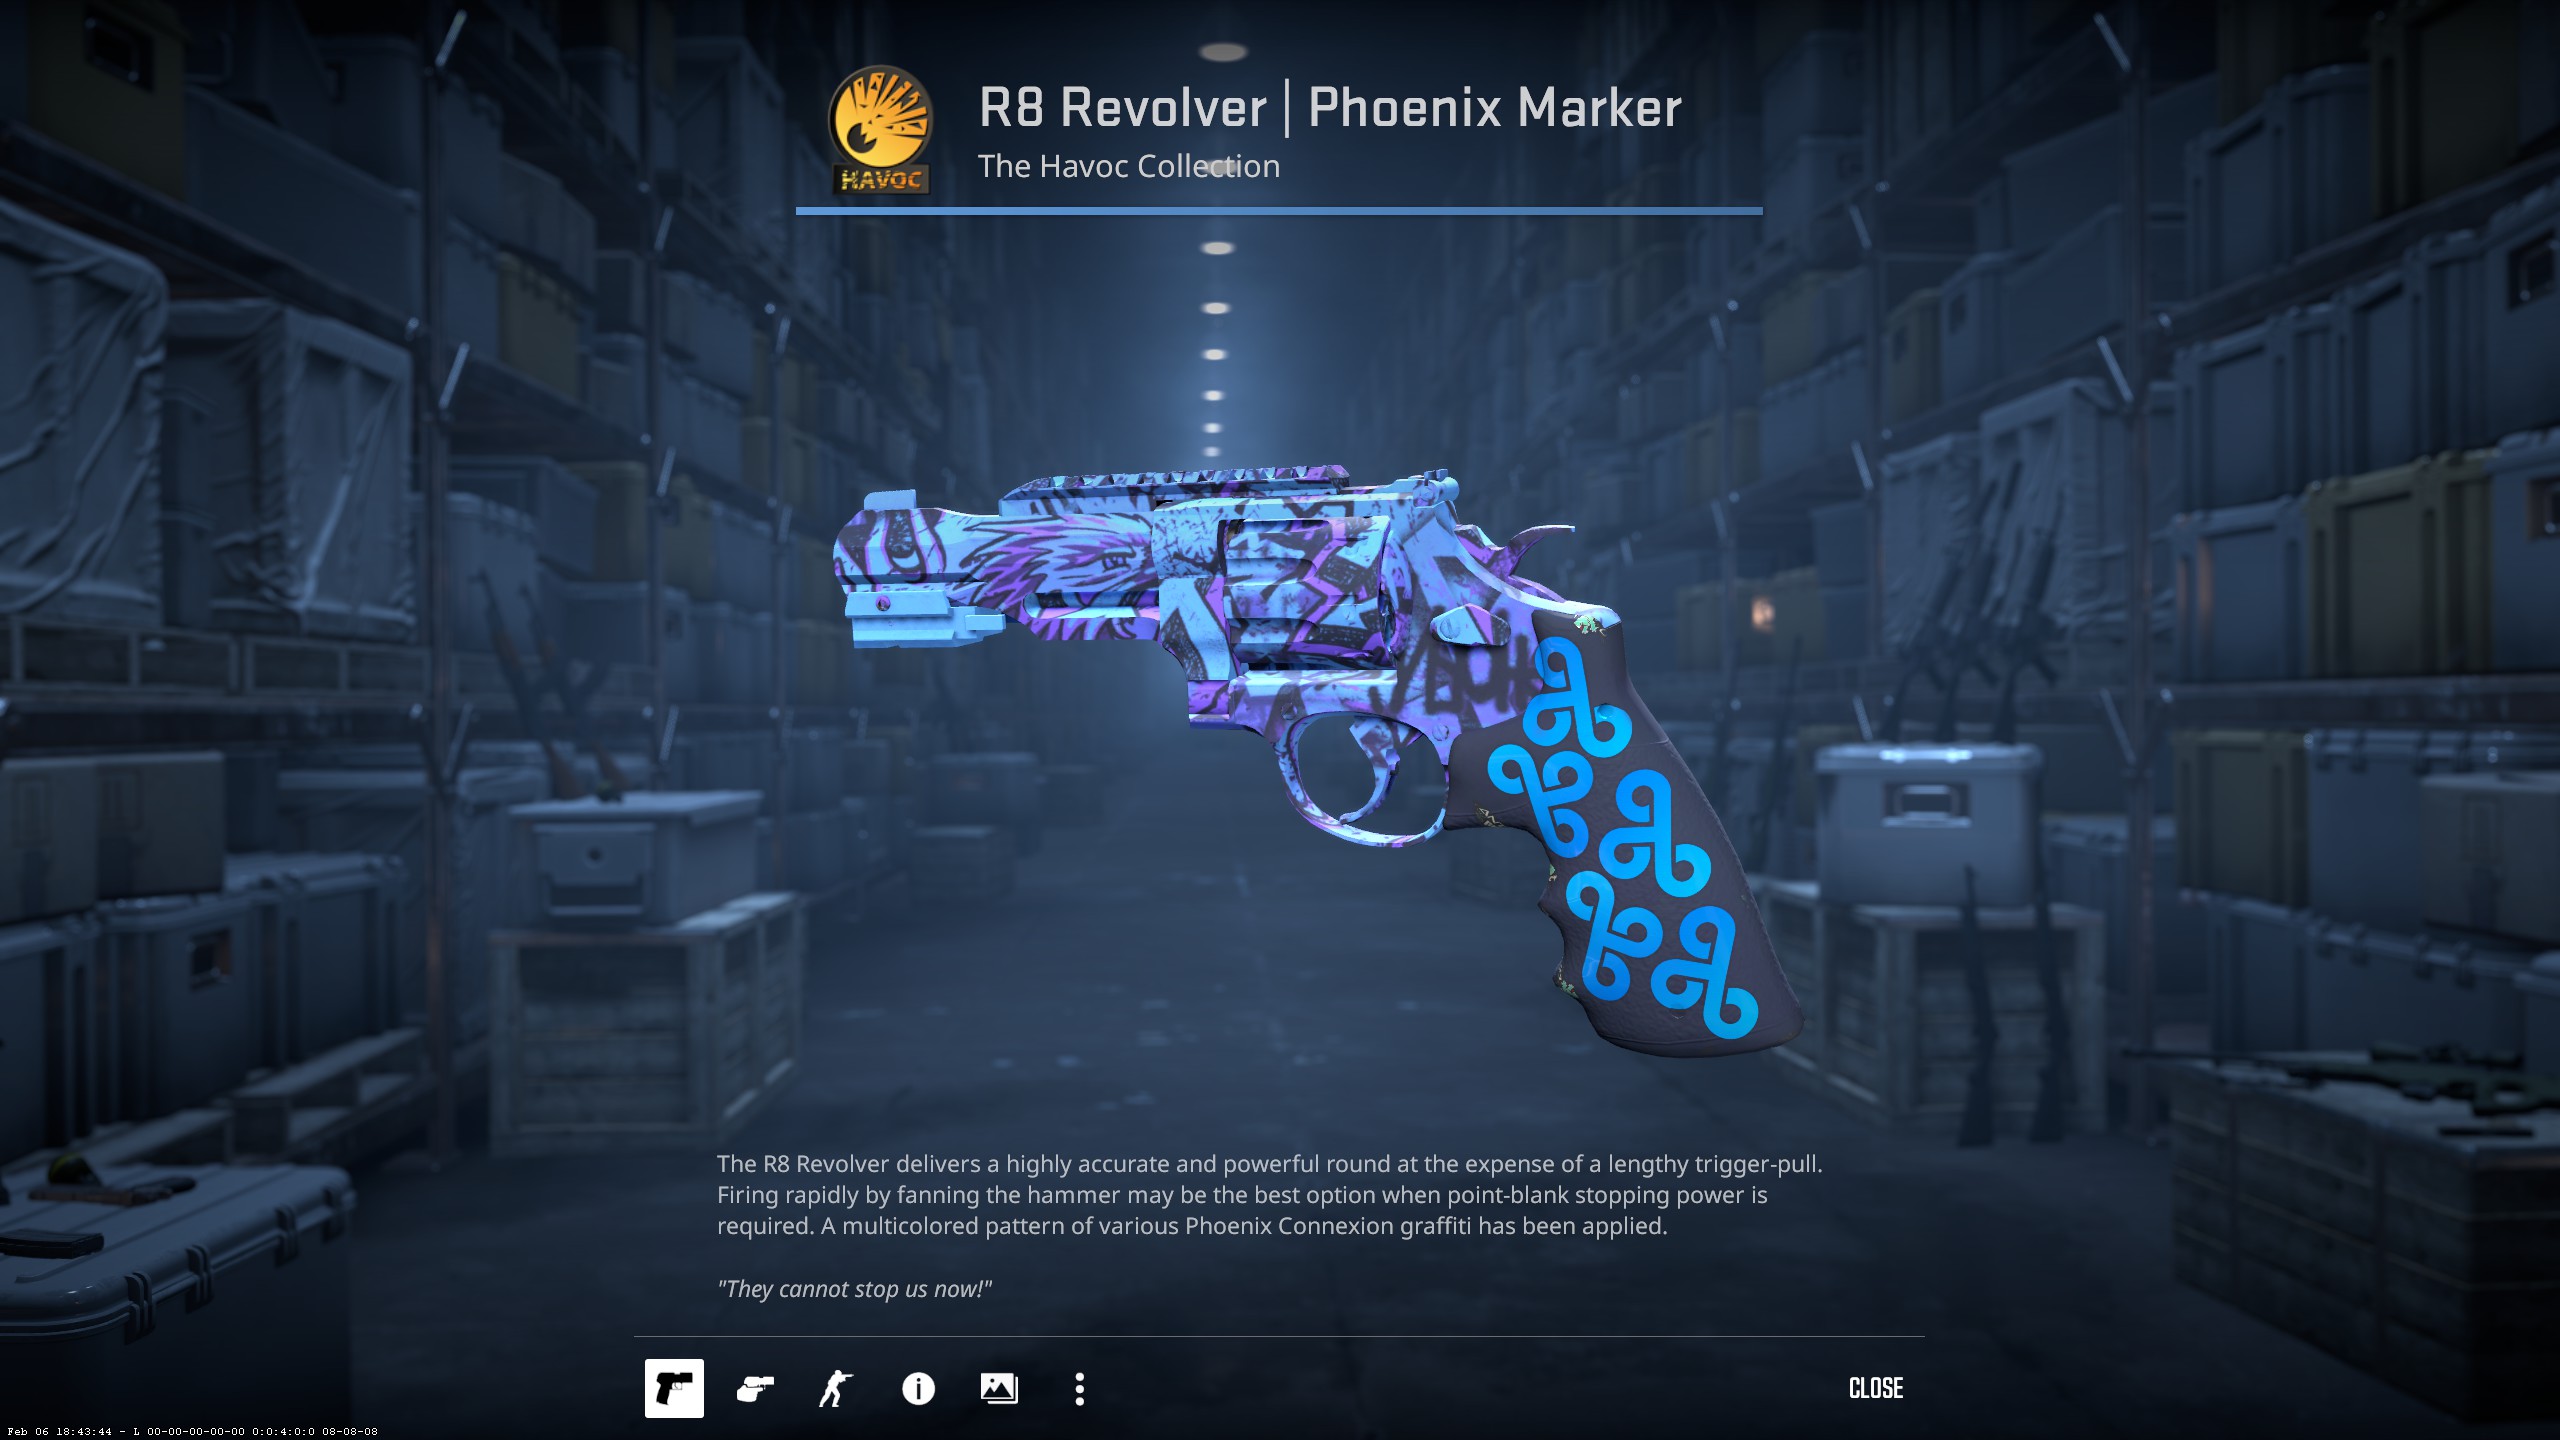 R8 Revolver Phoenix Marker with Cloud9 stickers